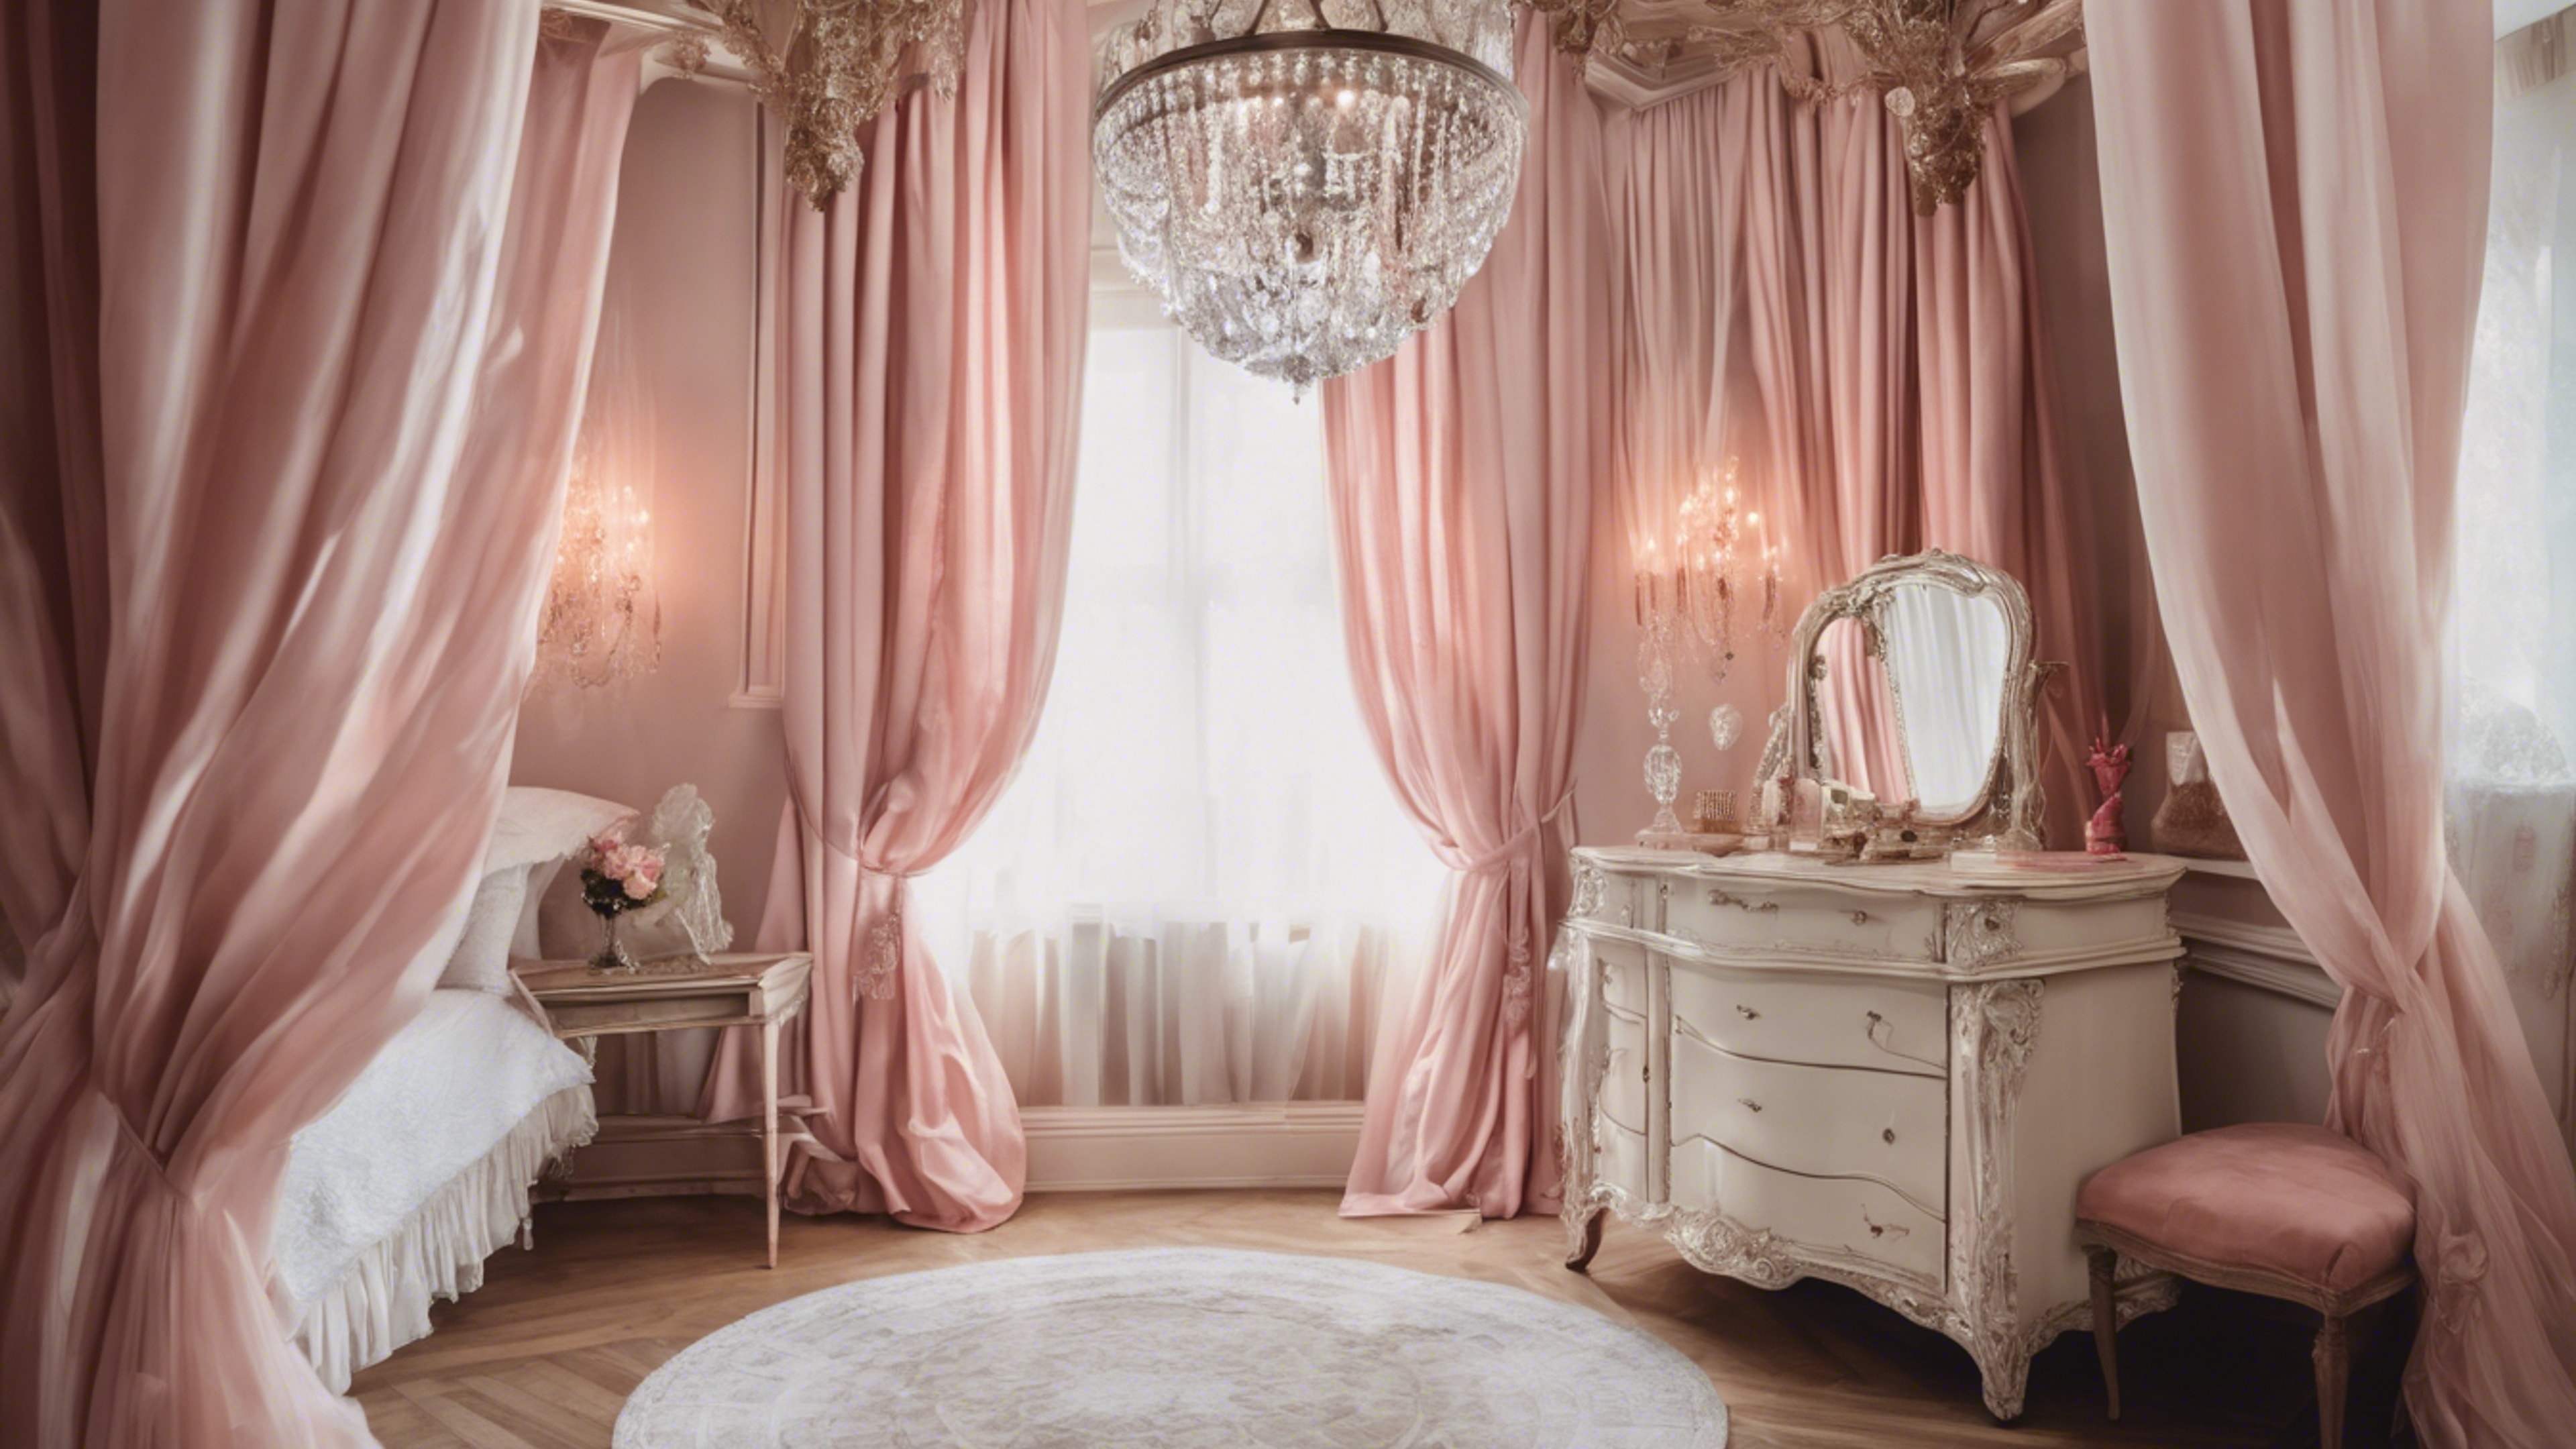 A feminine French bedroom, with canopy bed draped in soft-pink curtains, crystal chandelier hanging overhead, and an elegant antique vanity. วอลล์เปเปอร์[9a96ceac1df24dd59ae9]